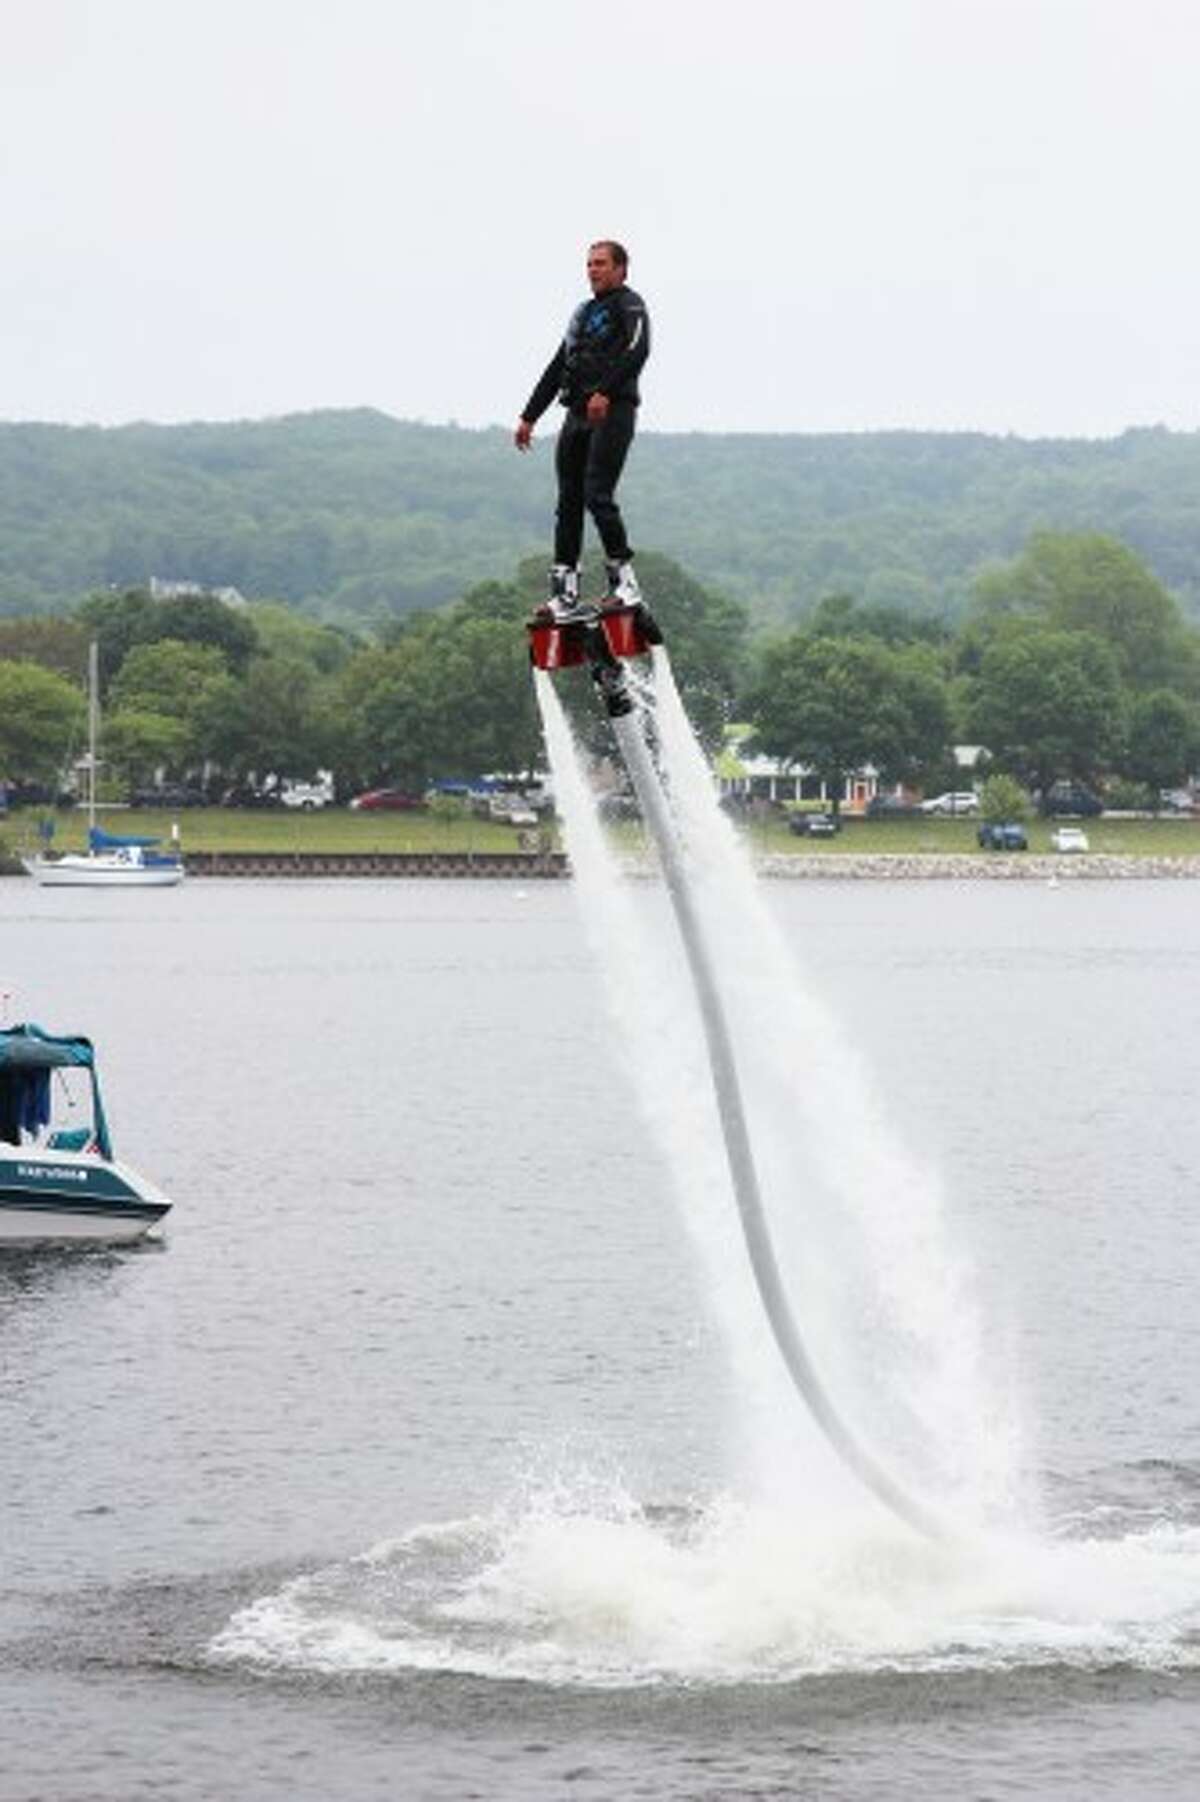 With a flyboard, people will be able to fly up to 40 feet into the air. The board can also let people swim like a dolphin through the water.